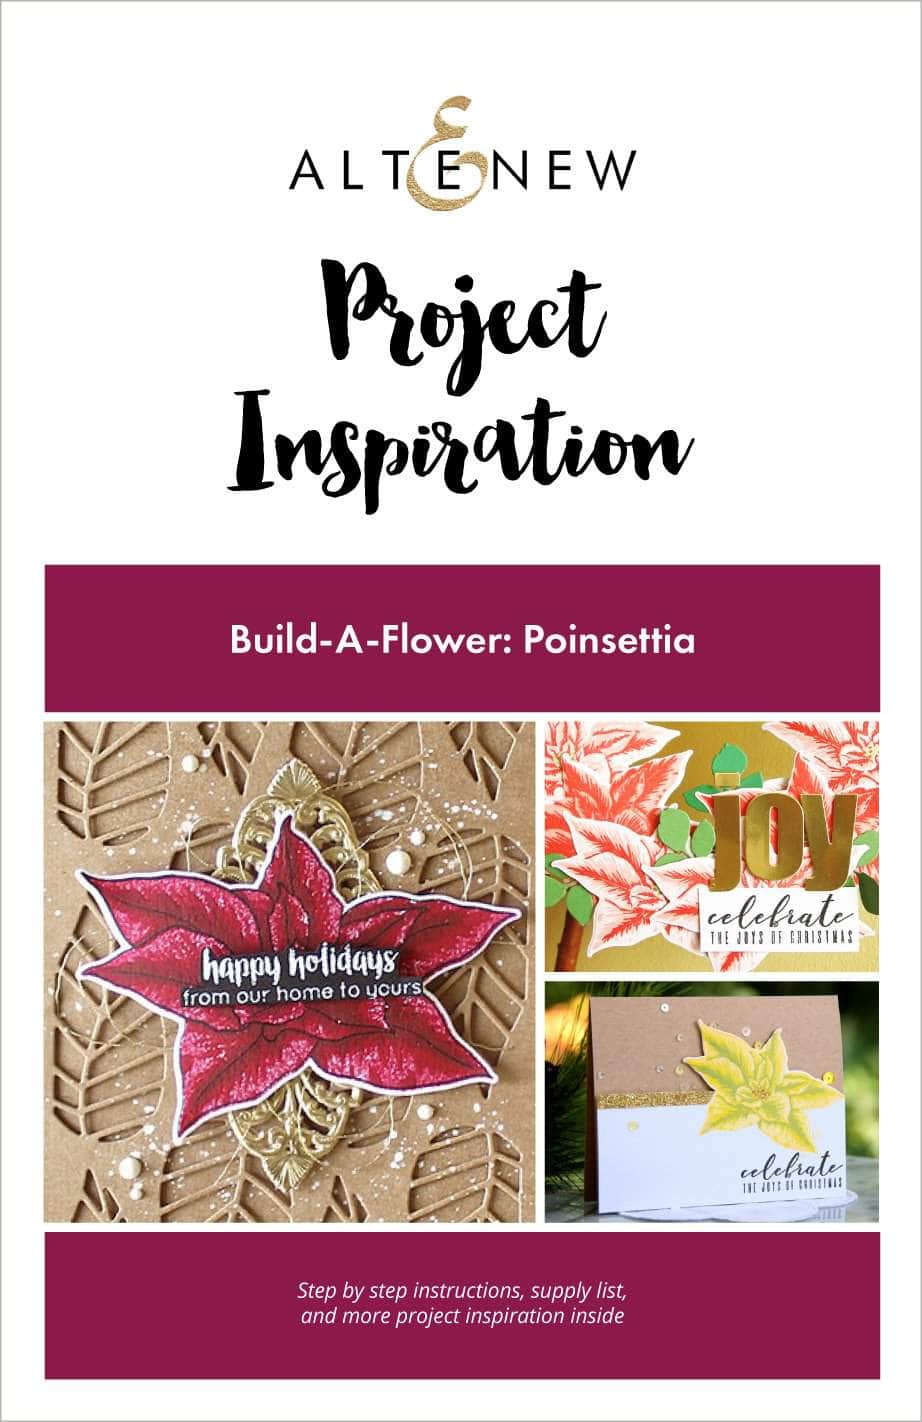 55Printing.com Printed Media Build-A-Flower: Poinsettia Project Inspiration Guide